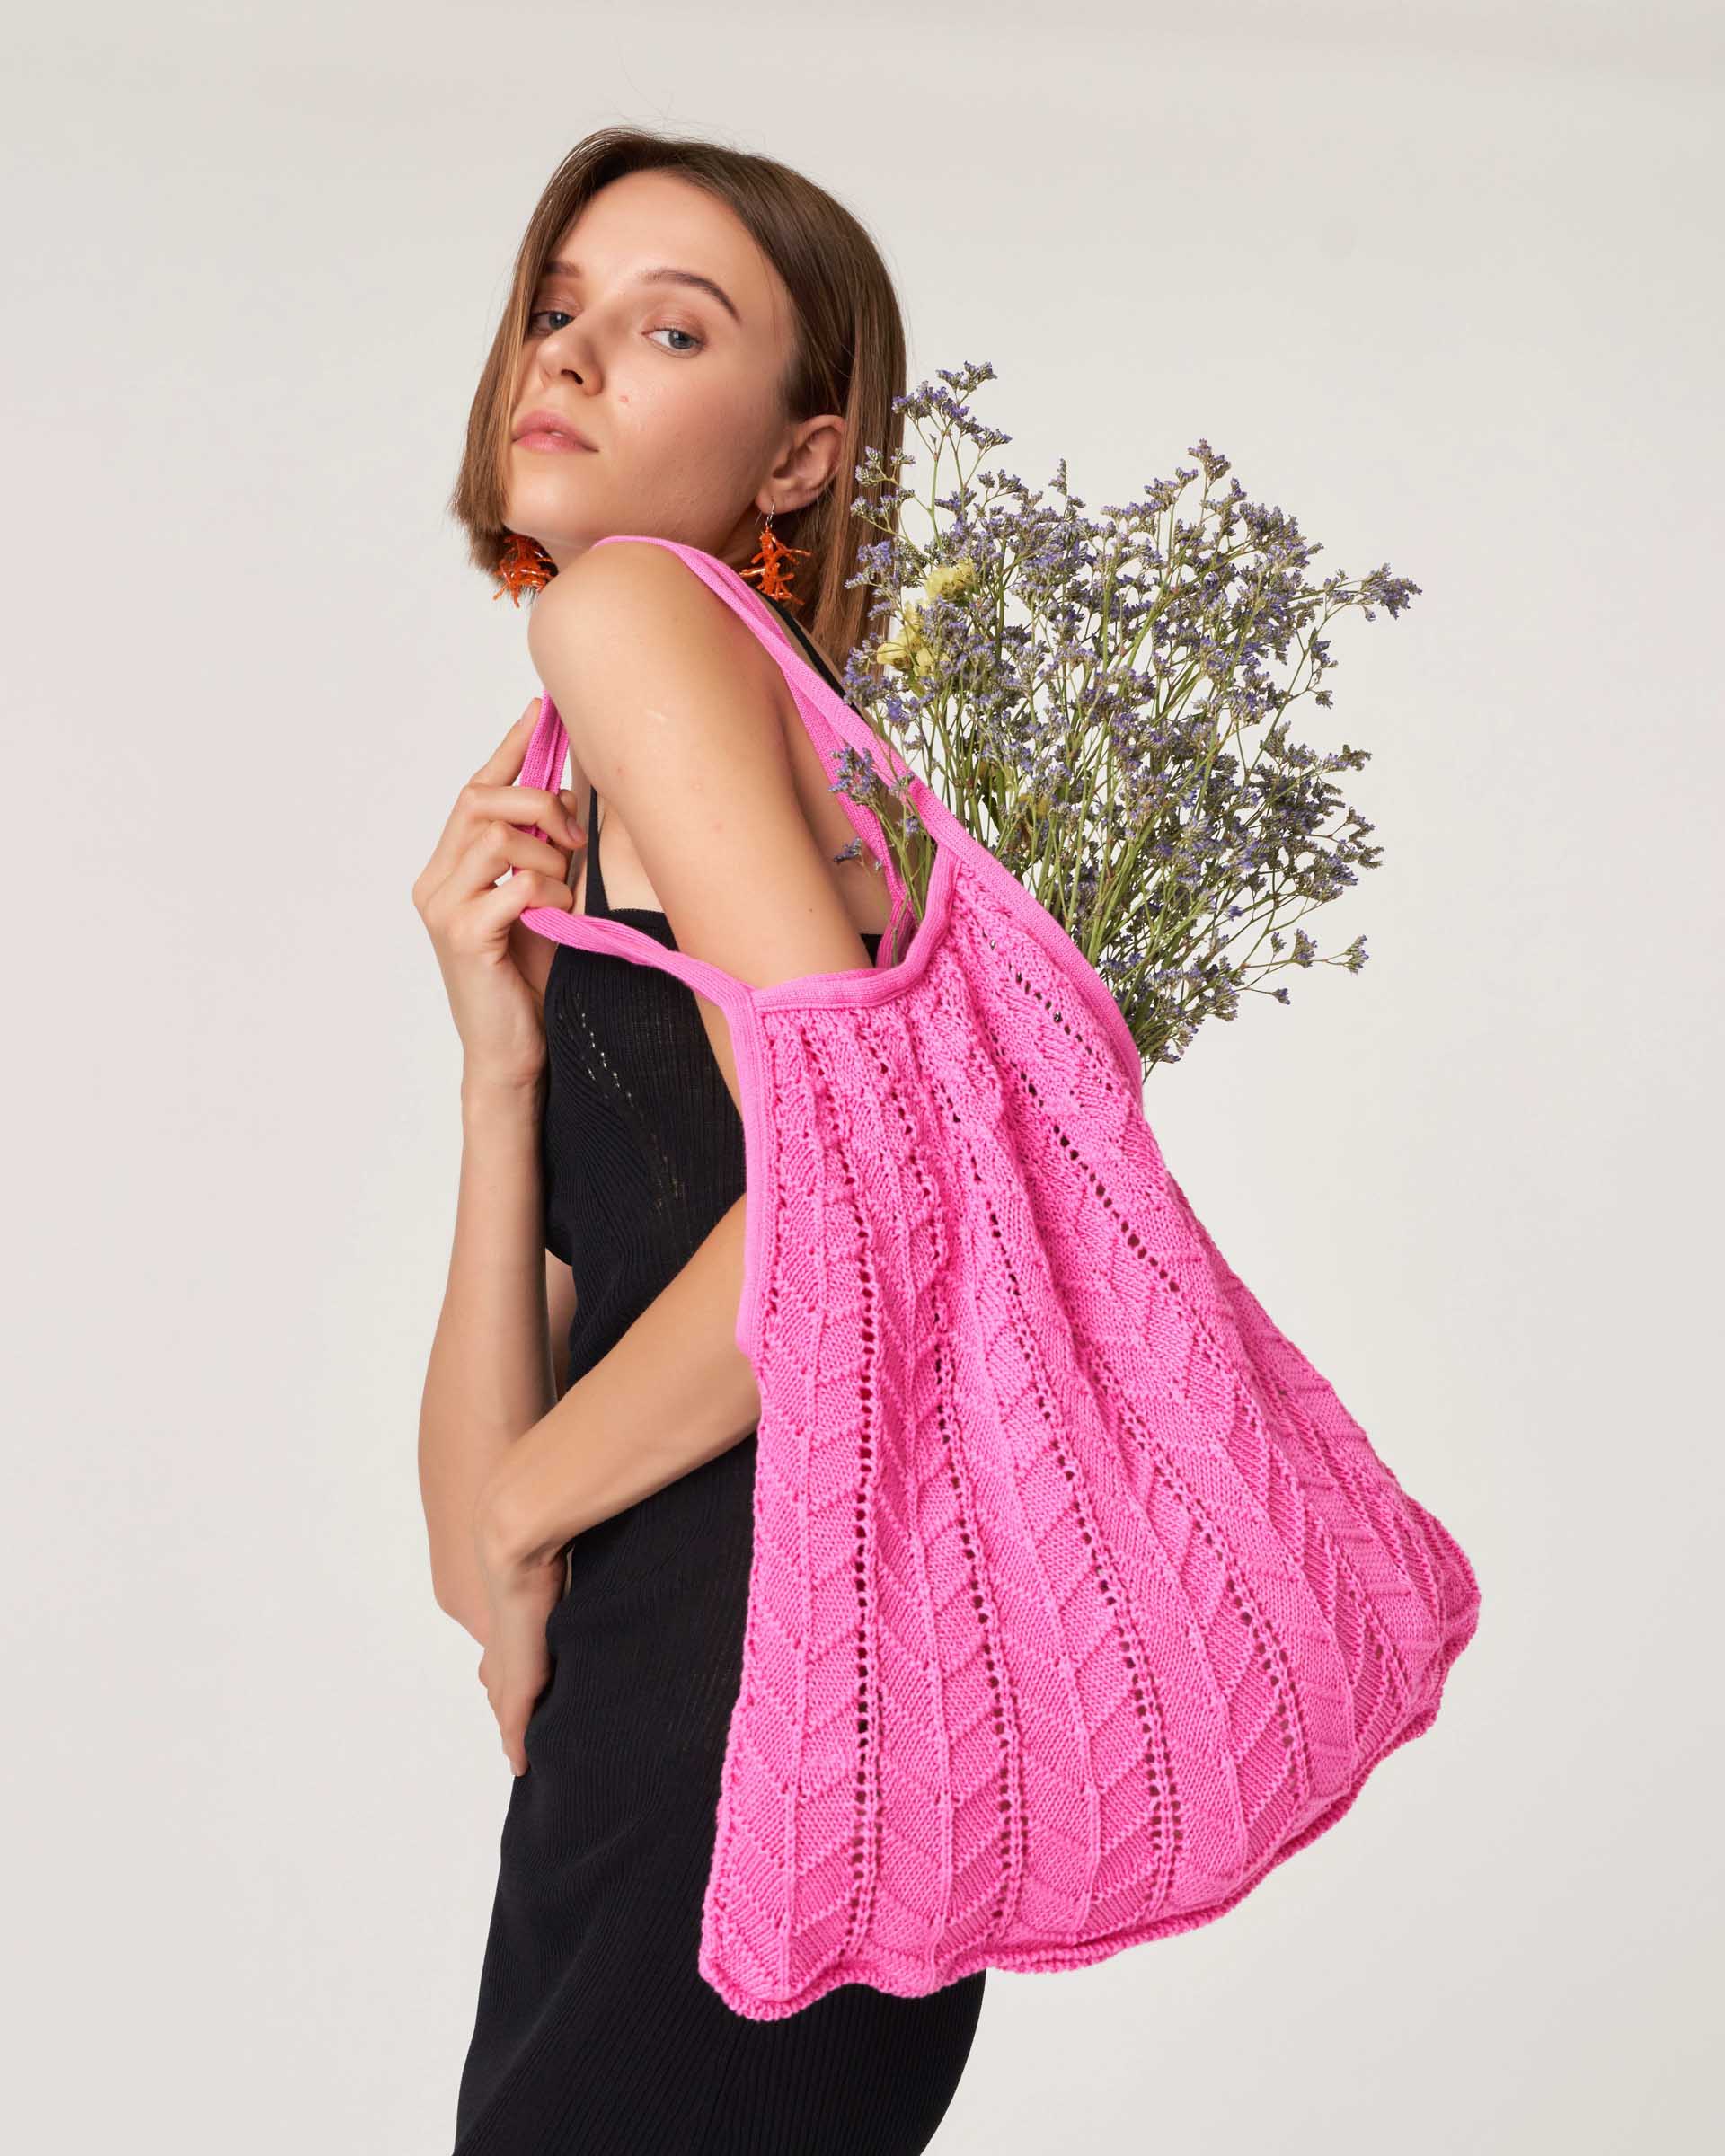 The Market Store | Perforated Knit Bag